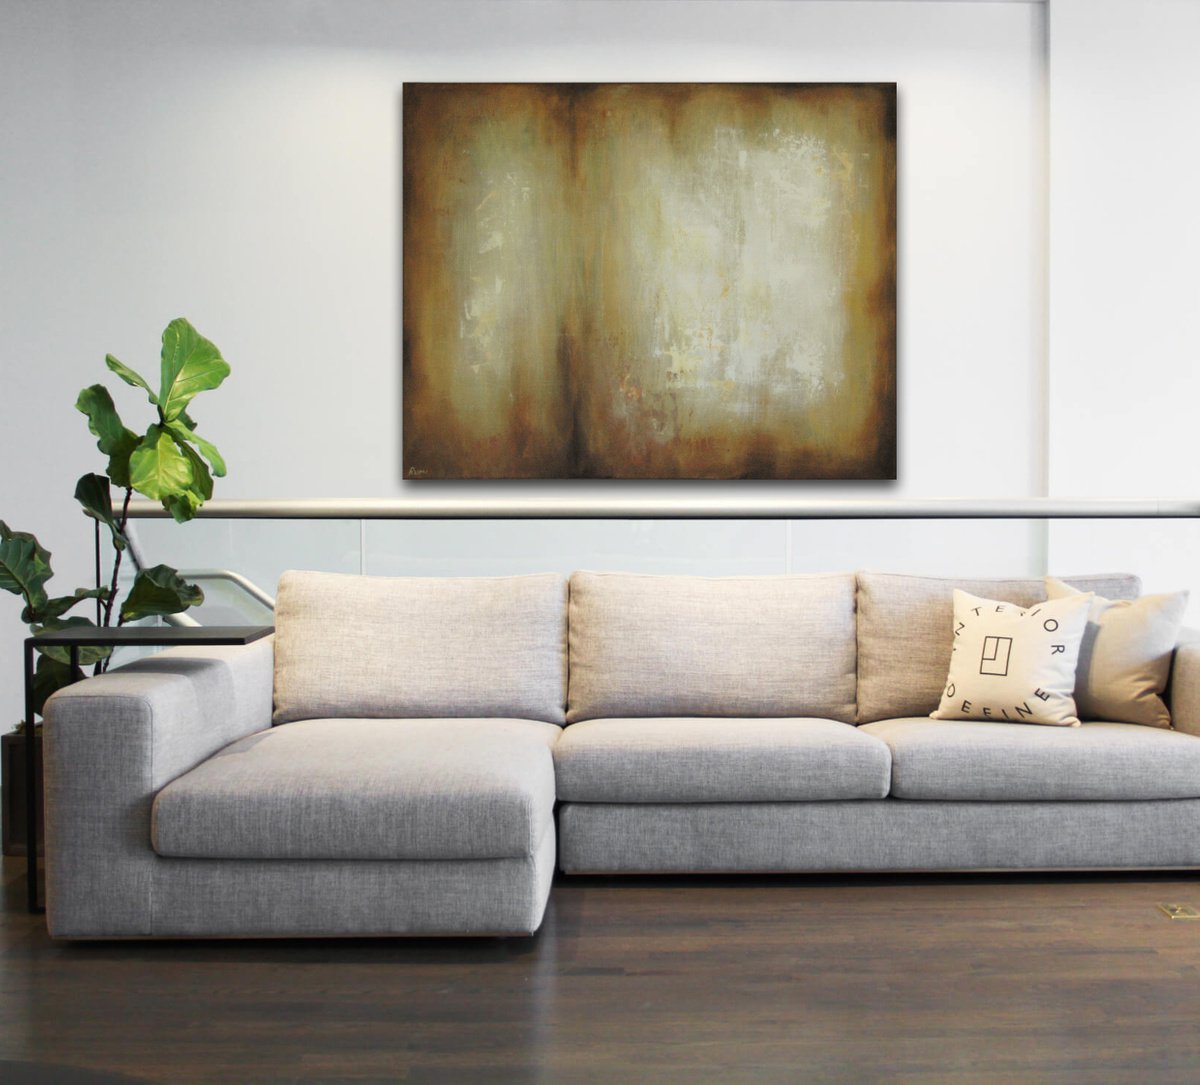 When The Time Comes. Original abstract painting. 100 x 80 cm. by Rumen Spasov